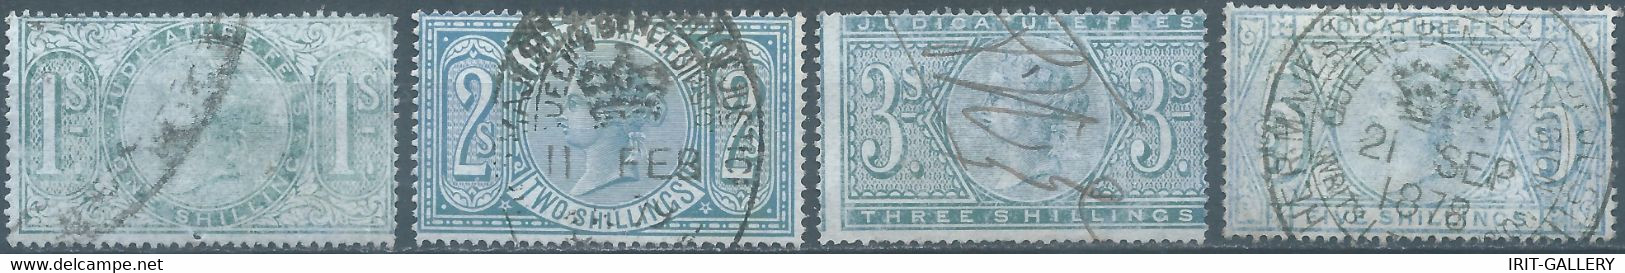 Great Britain-ENGLAND,Queen Victoria,1880-1900 Revenue Stamp Tax Fiscal,JUDICATURE FEES,1-2-3-5 Shillings,Used - Steuermarken